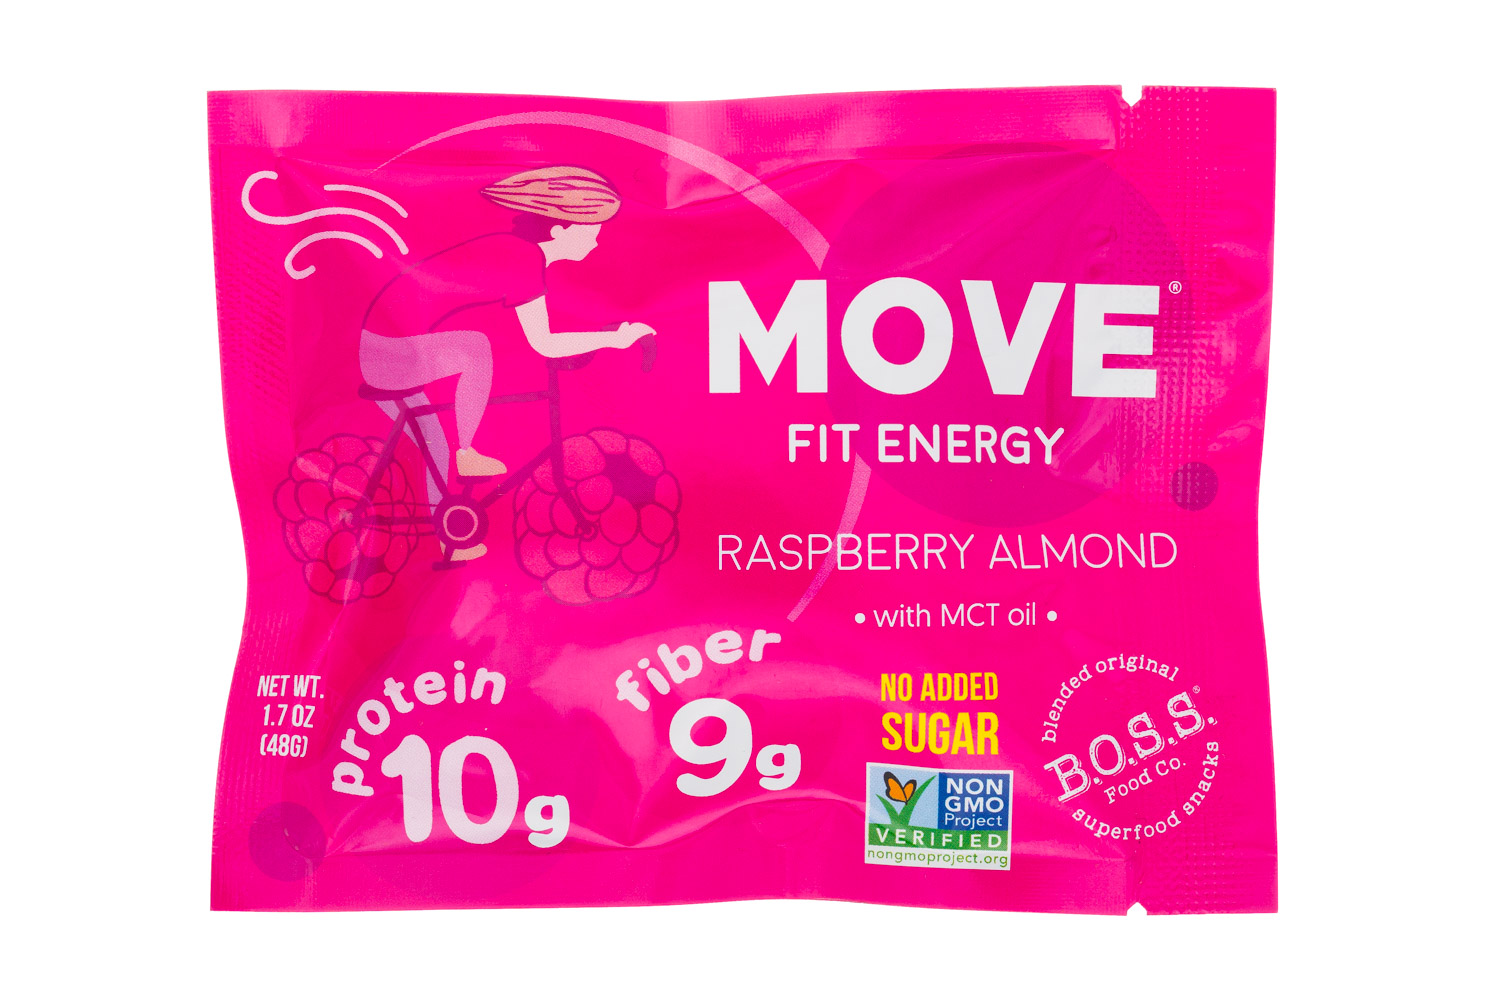 MOVE - Fit Energy